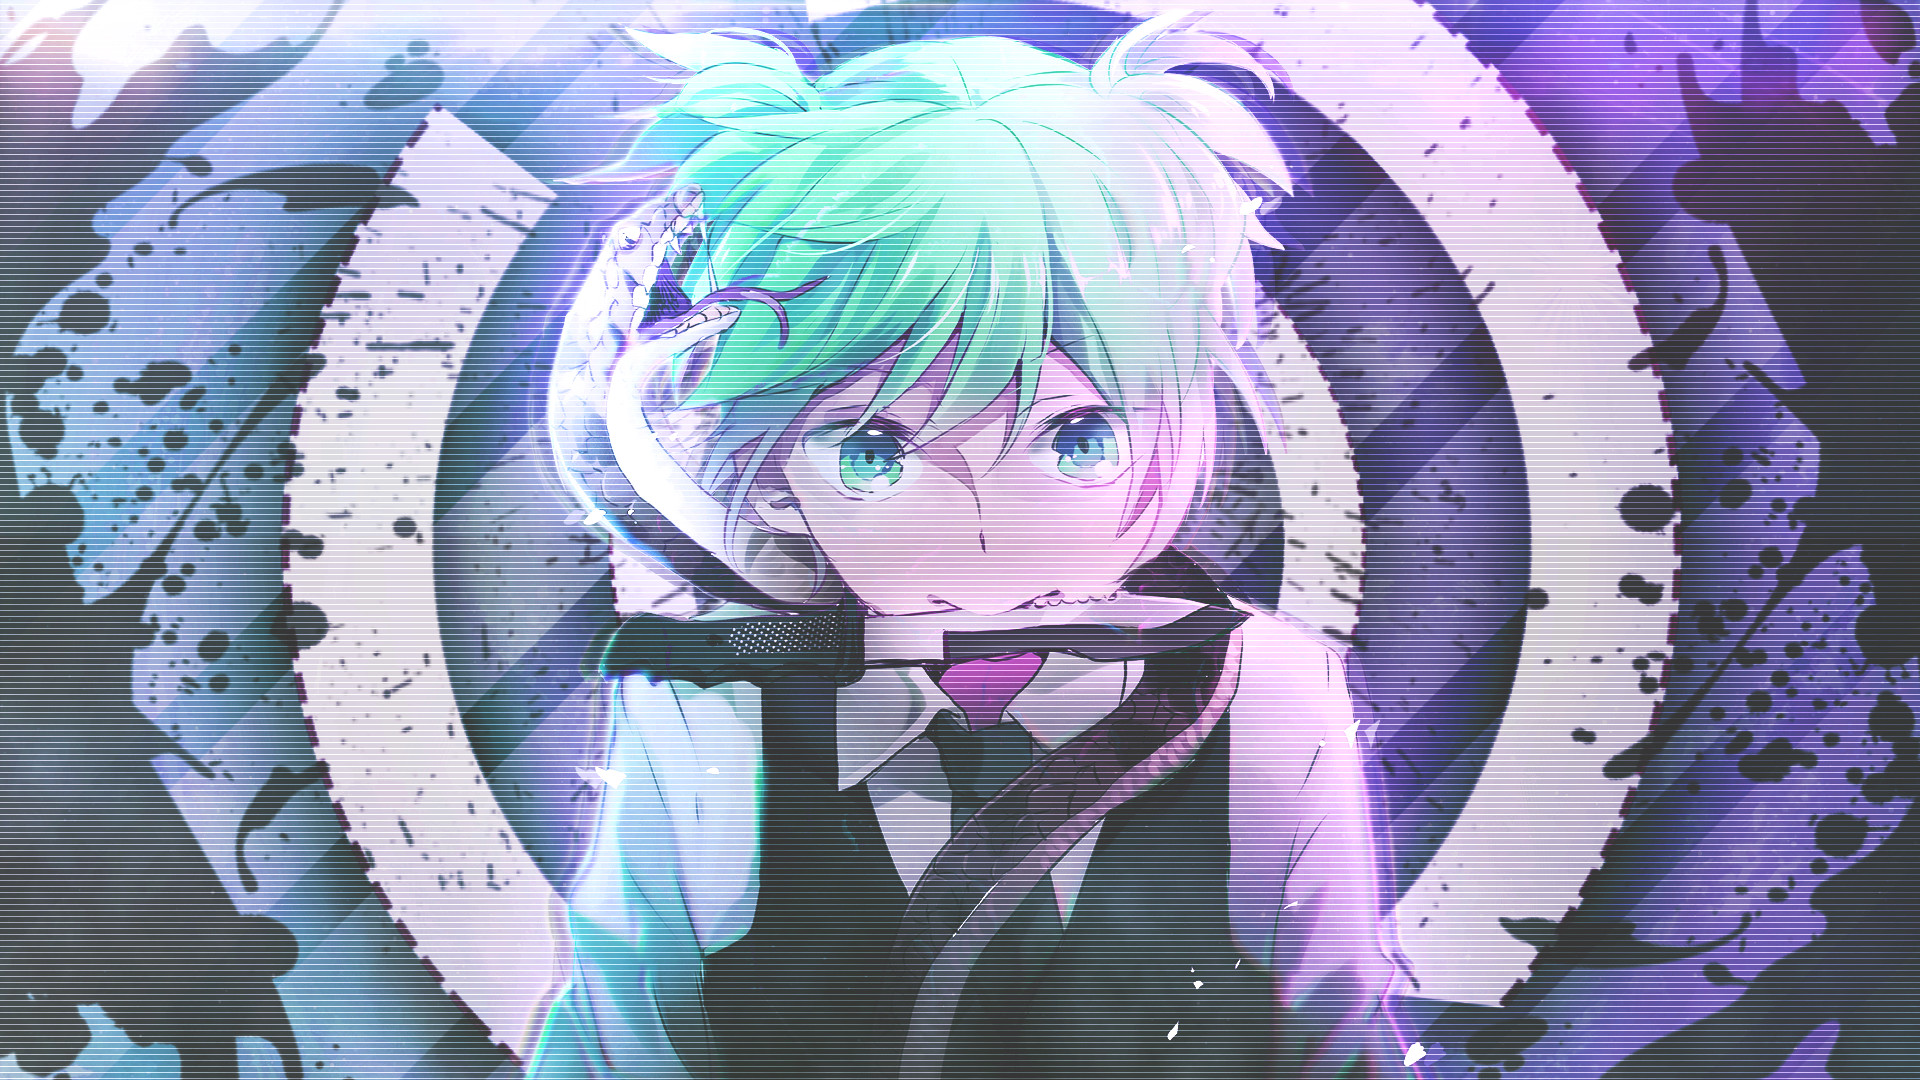 1920x1080 Assassination Classroom by AironeAMV Assassination Classroom by AironeAMV